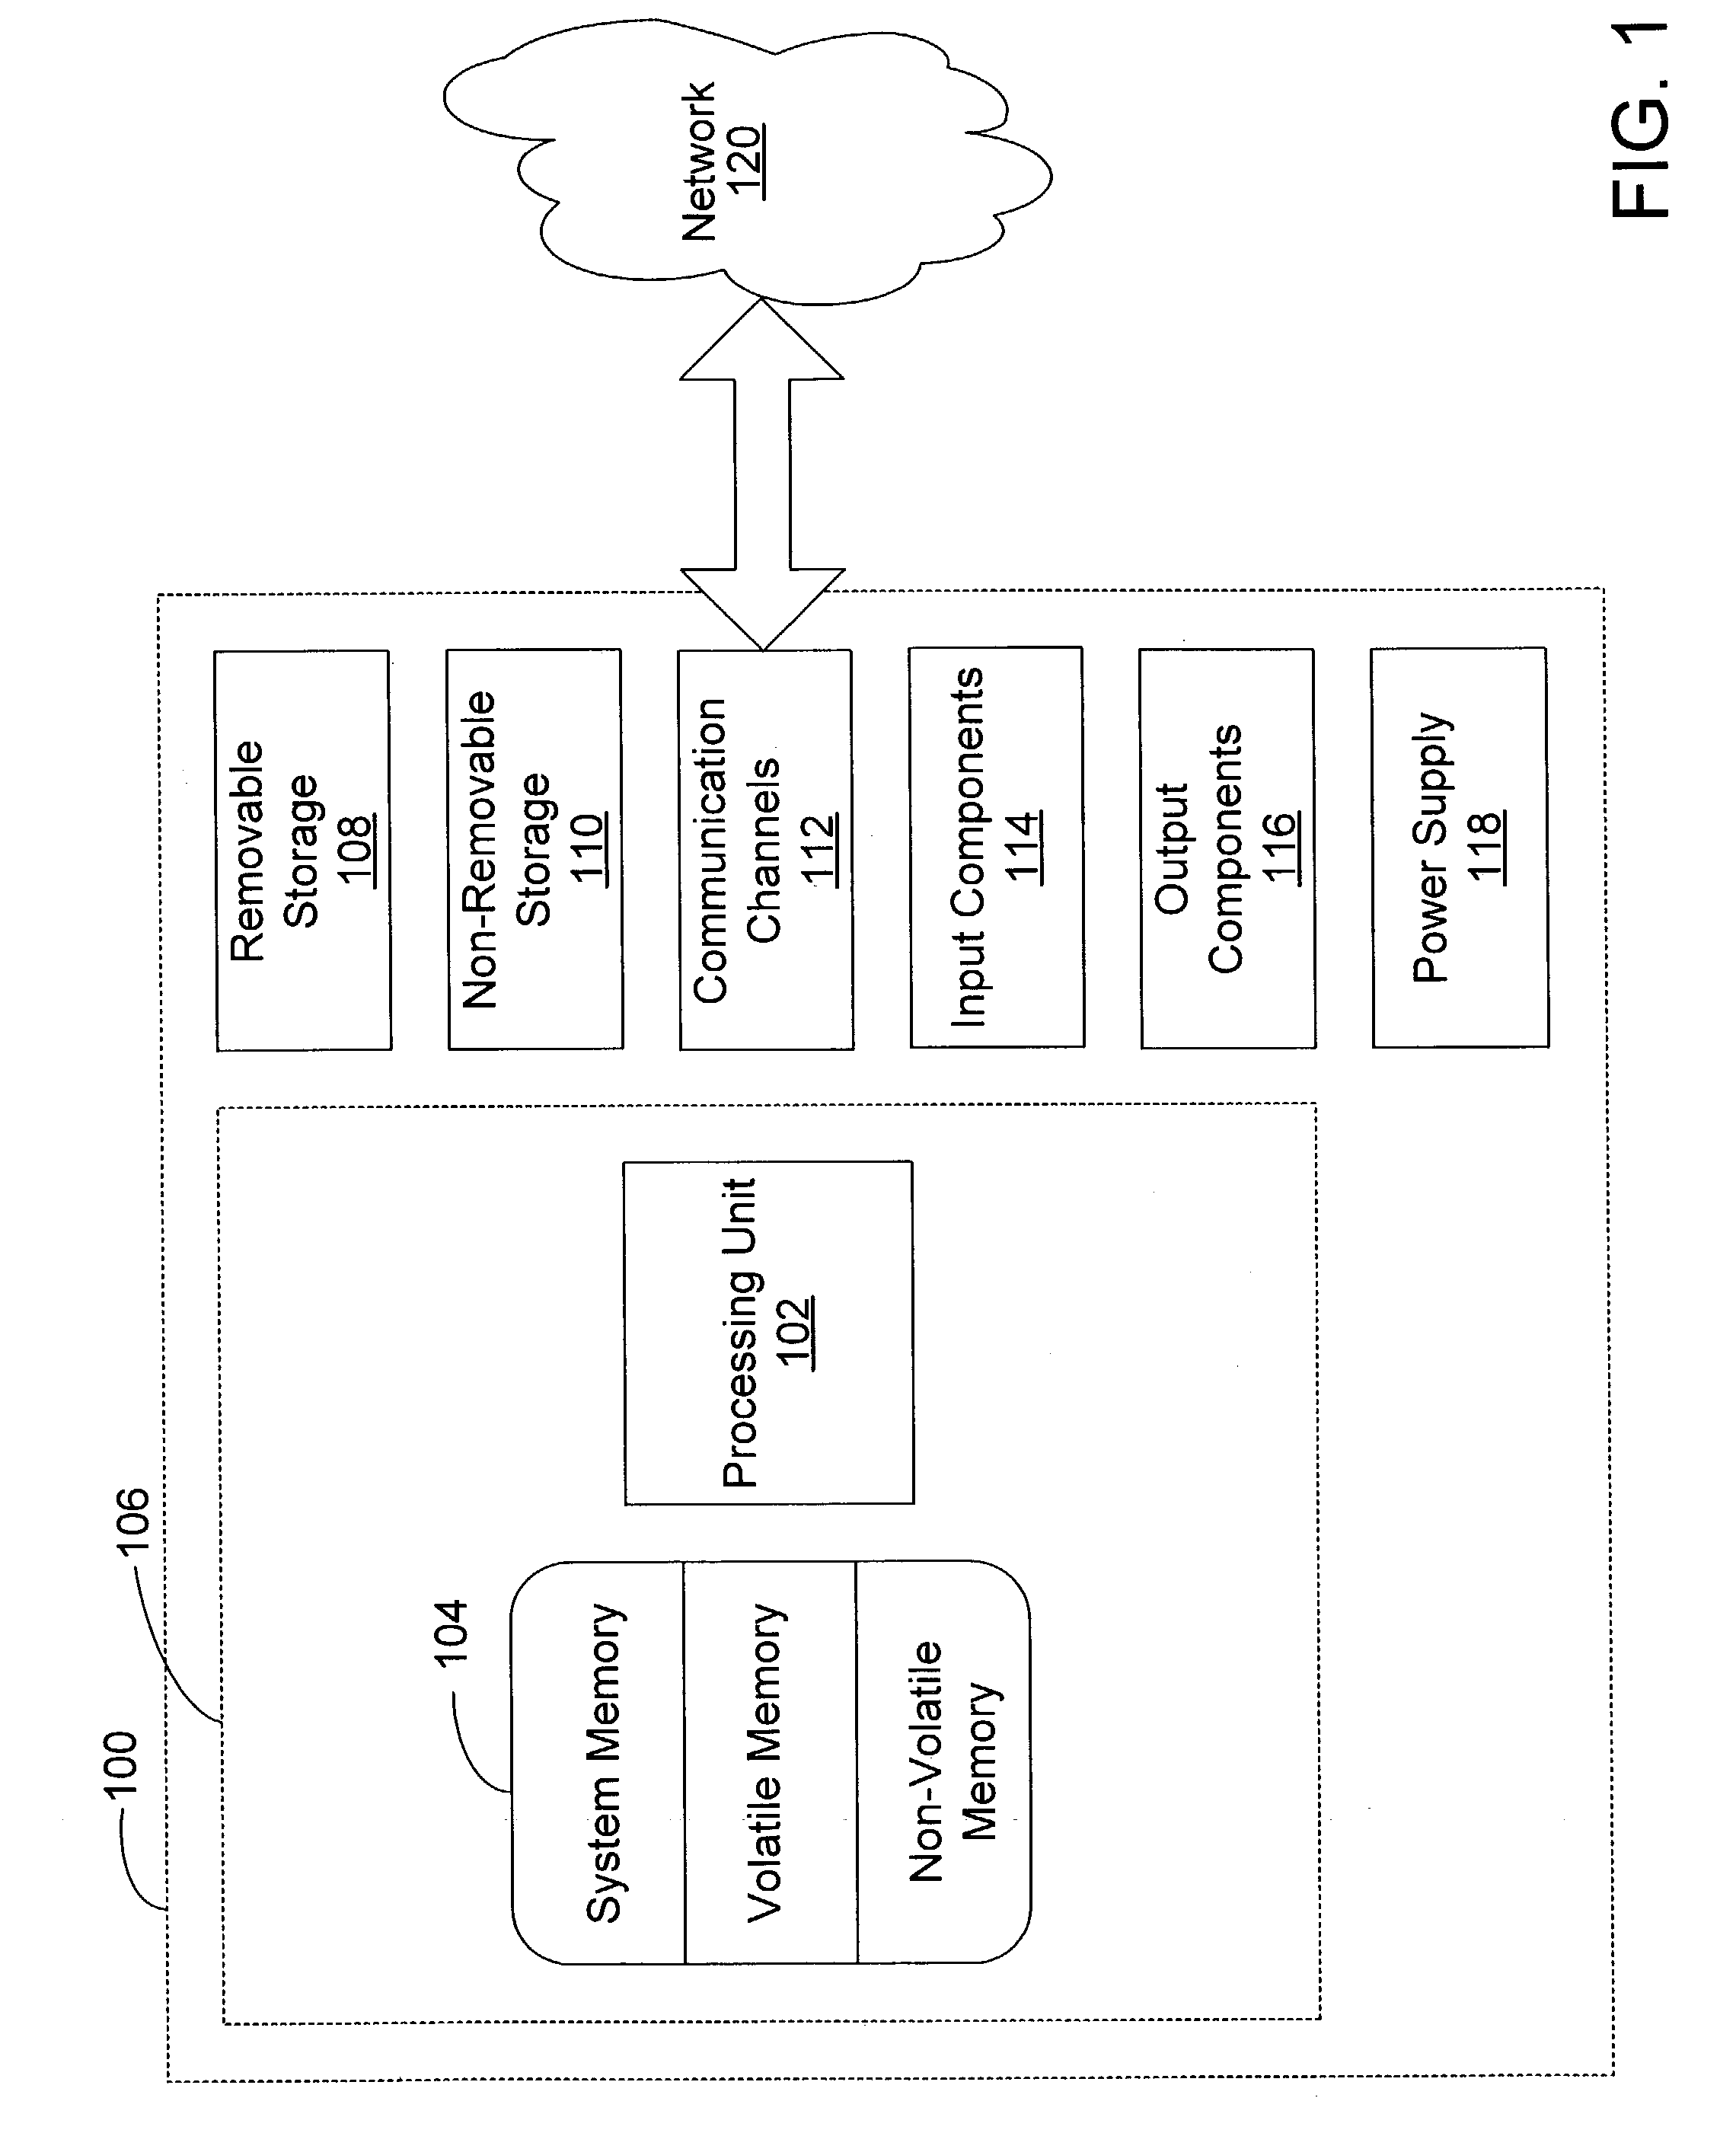 Methods and systems for collecting, analyzing, and reporting software reliability and availability